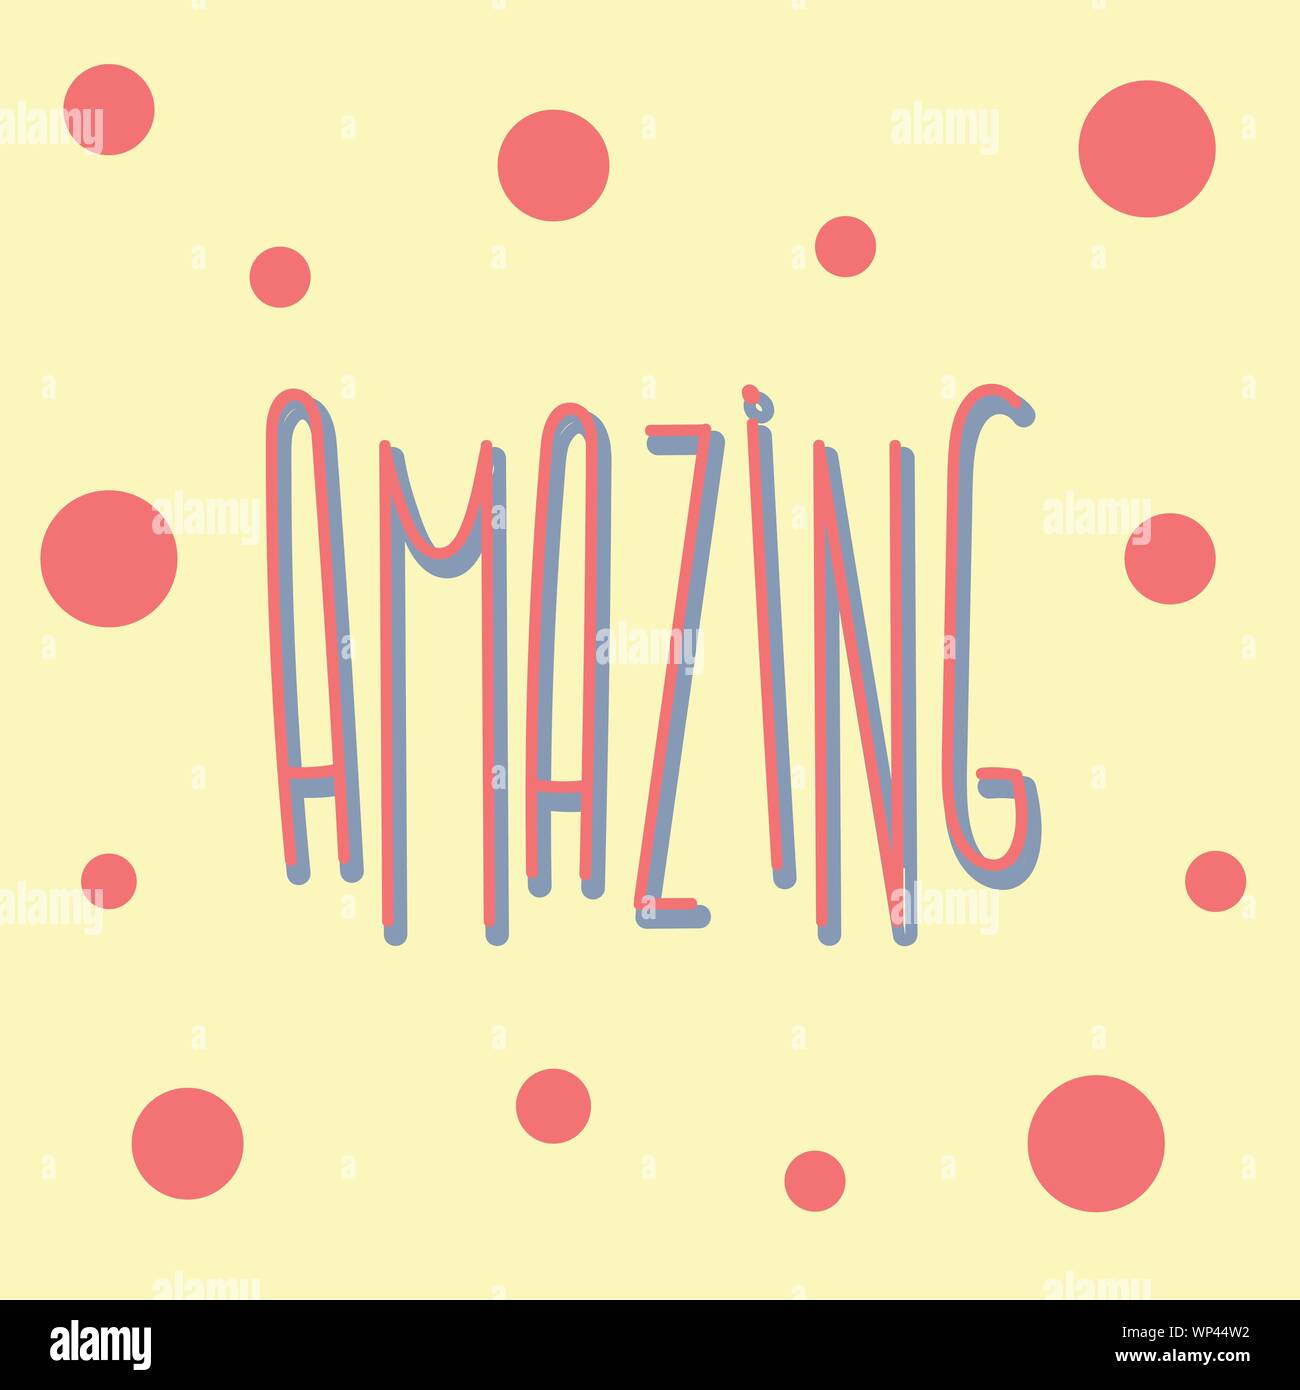 Amazing text sign in hand drawn lettering Stock Vector